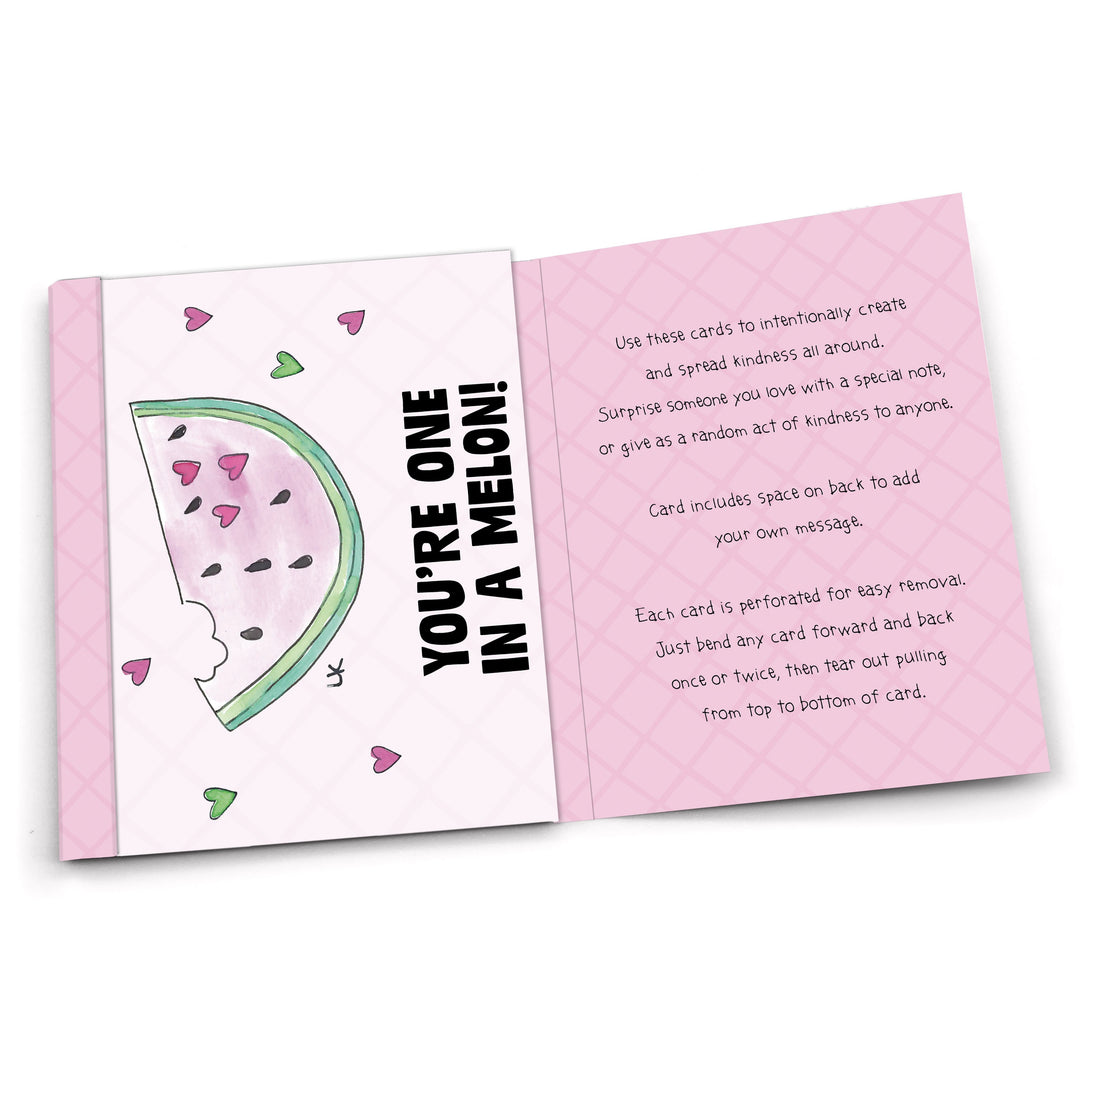 Sprinkle Kindness Jumbo Tear and Share Lunch Notes for Kids